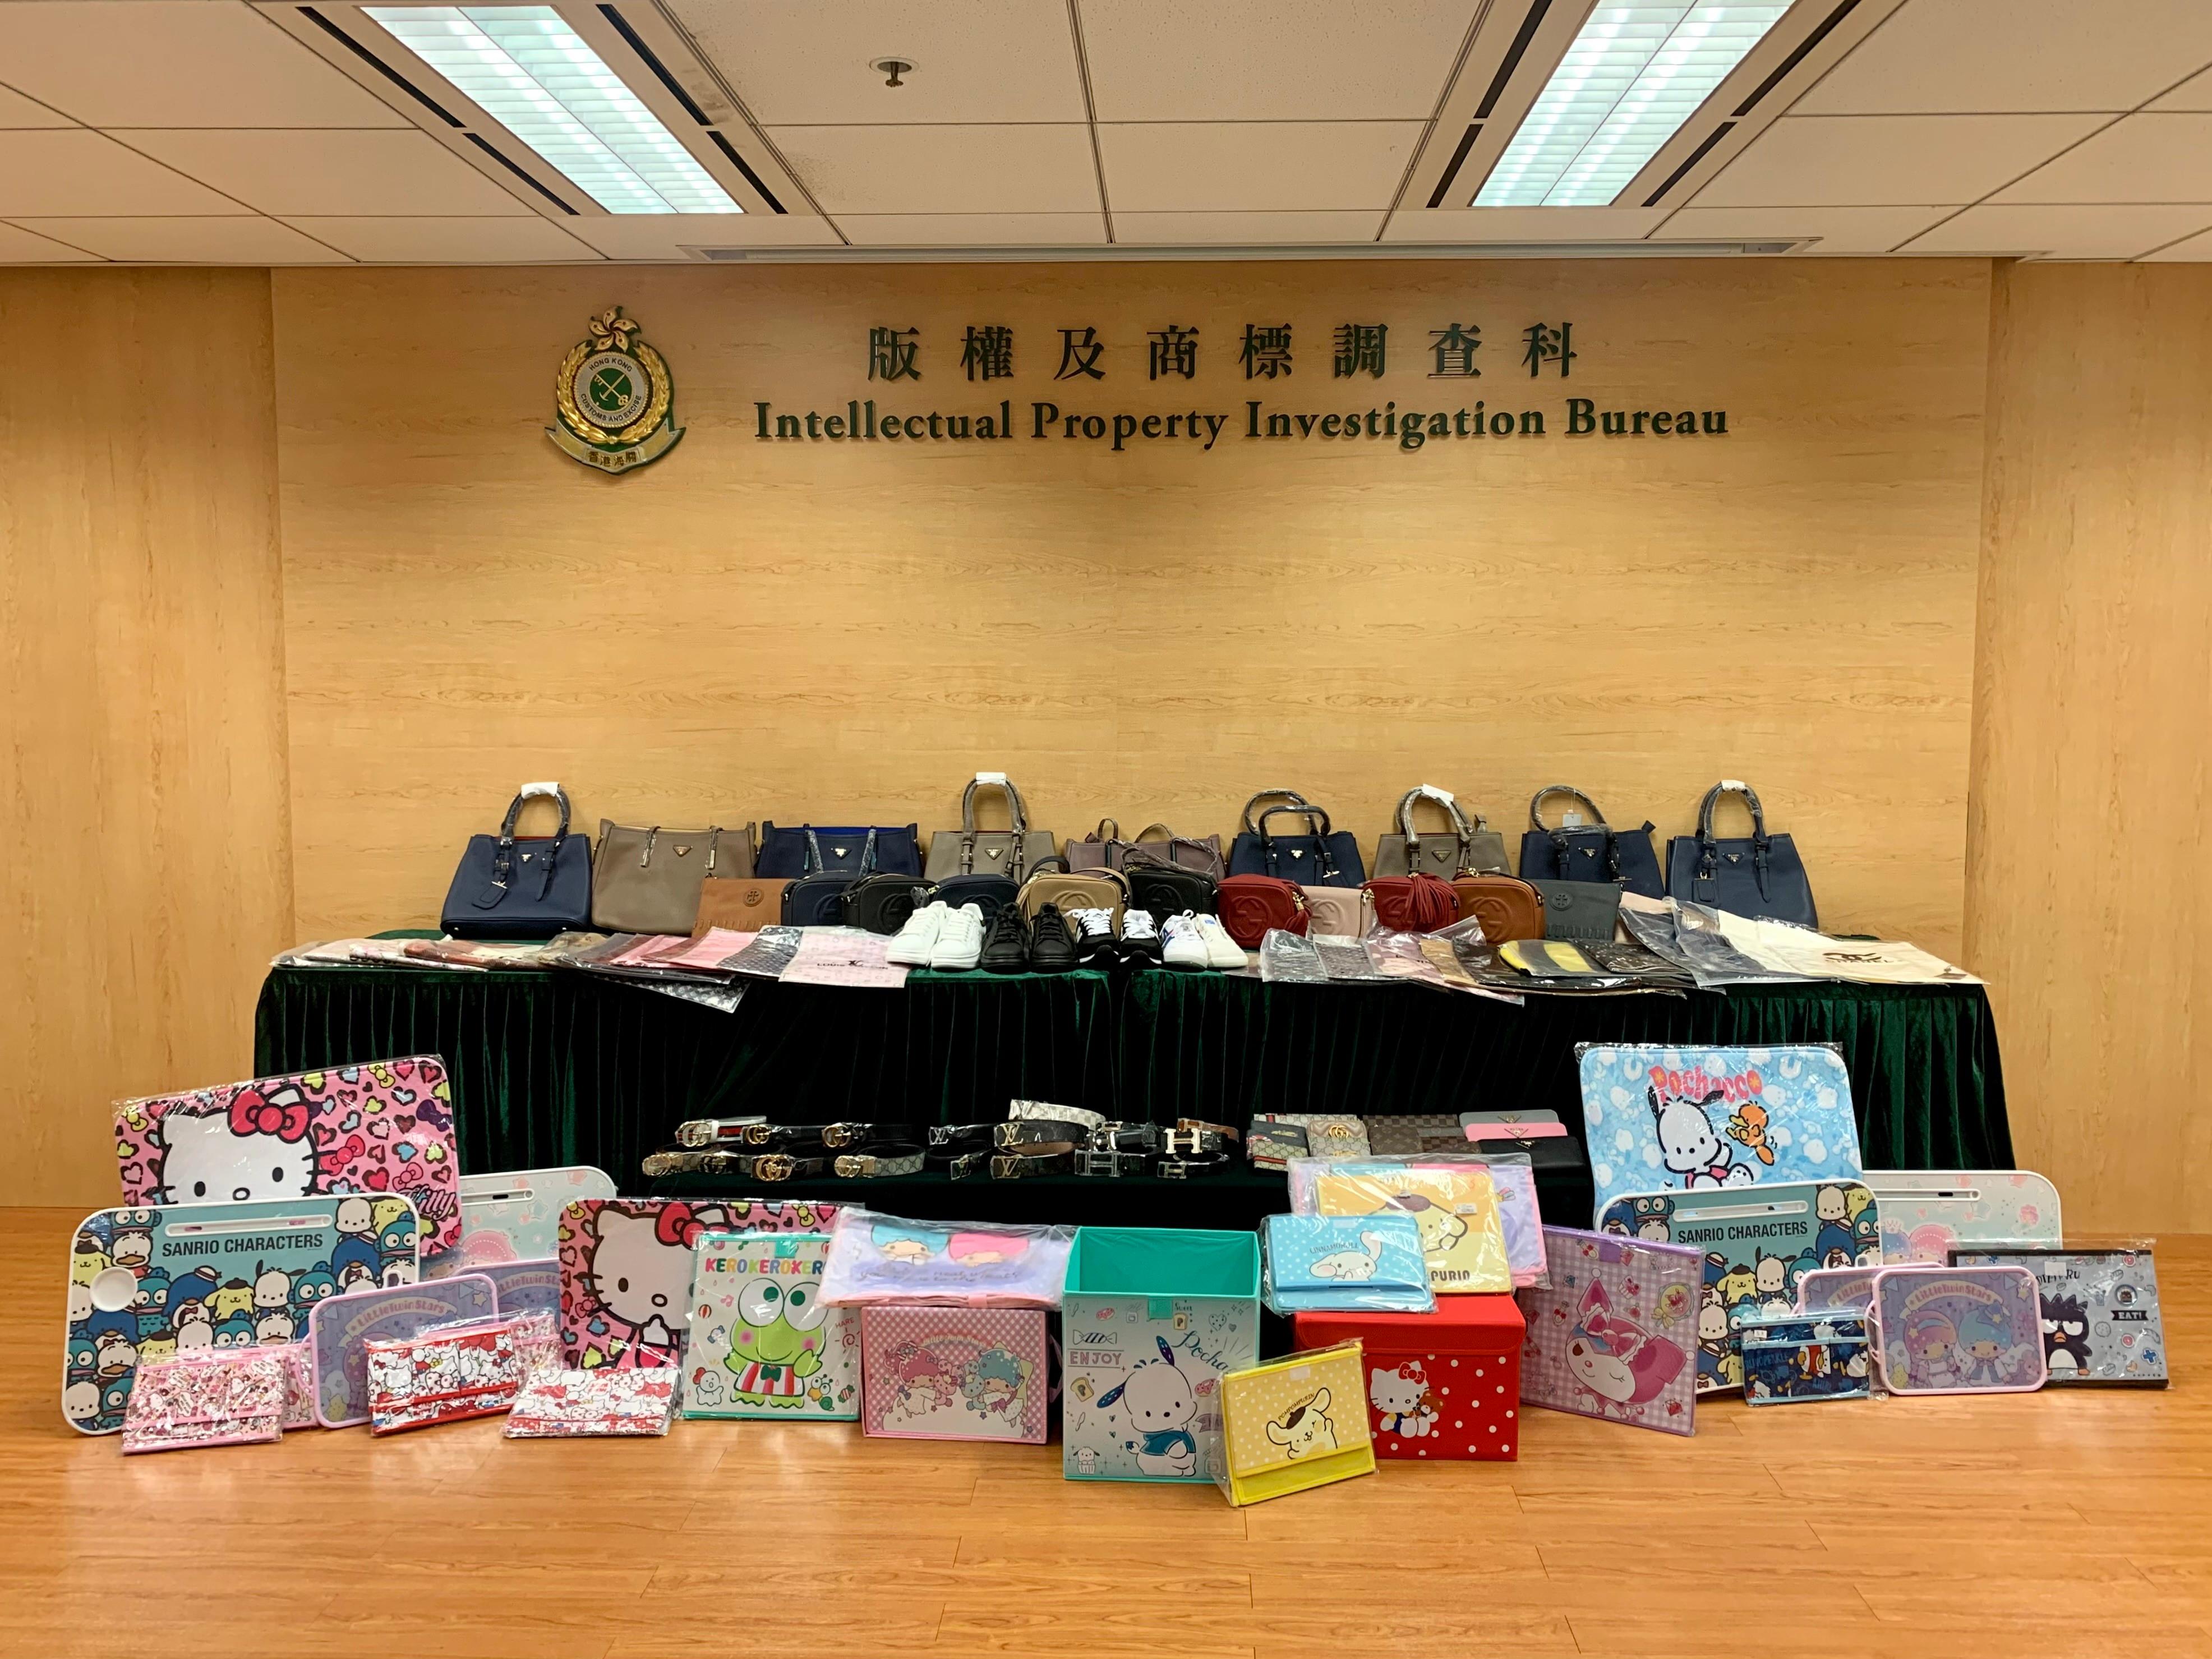 Hong Kong Customs yesterday (December 22) conducted a special operation in Mong Kok to combat the sale of counterfeit goods and seized about 4 300 items of suspected counterfeit goods with an estimated market value of about $260,000. Photo shows some of the suspected counterfeit goods seized.